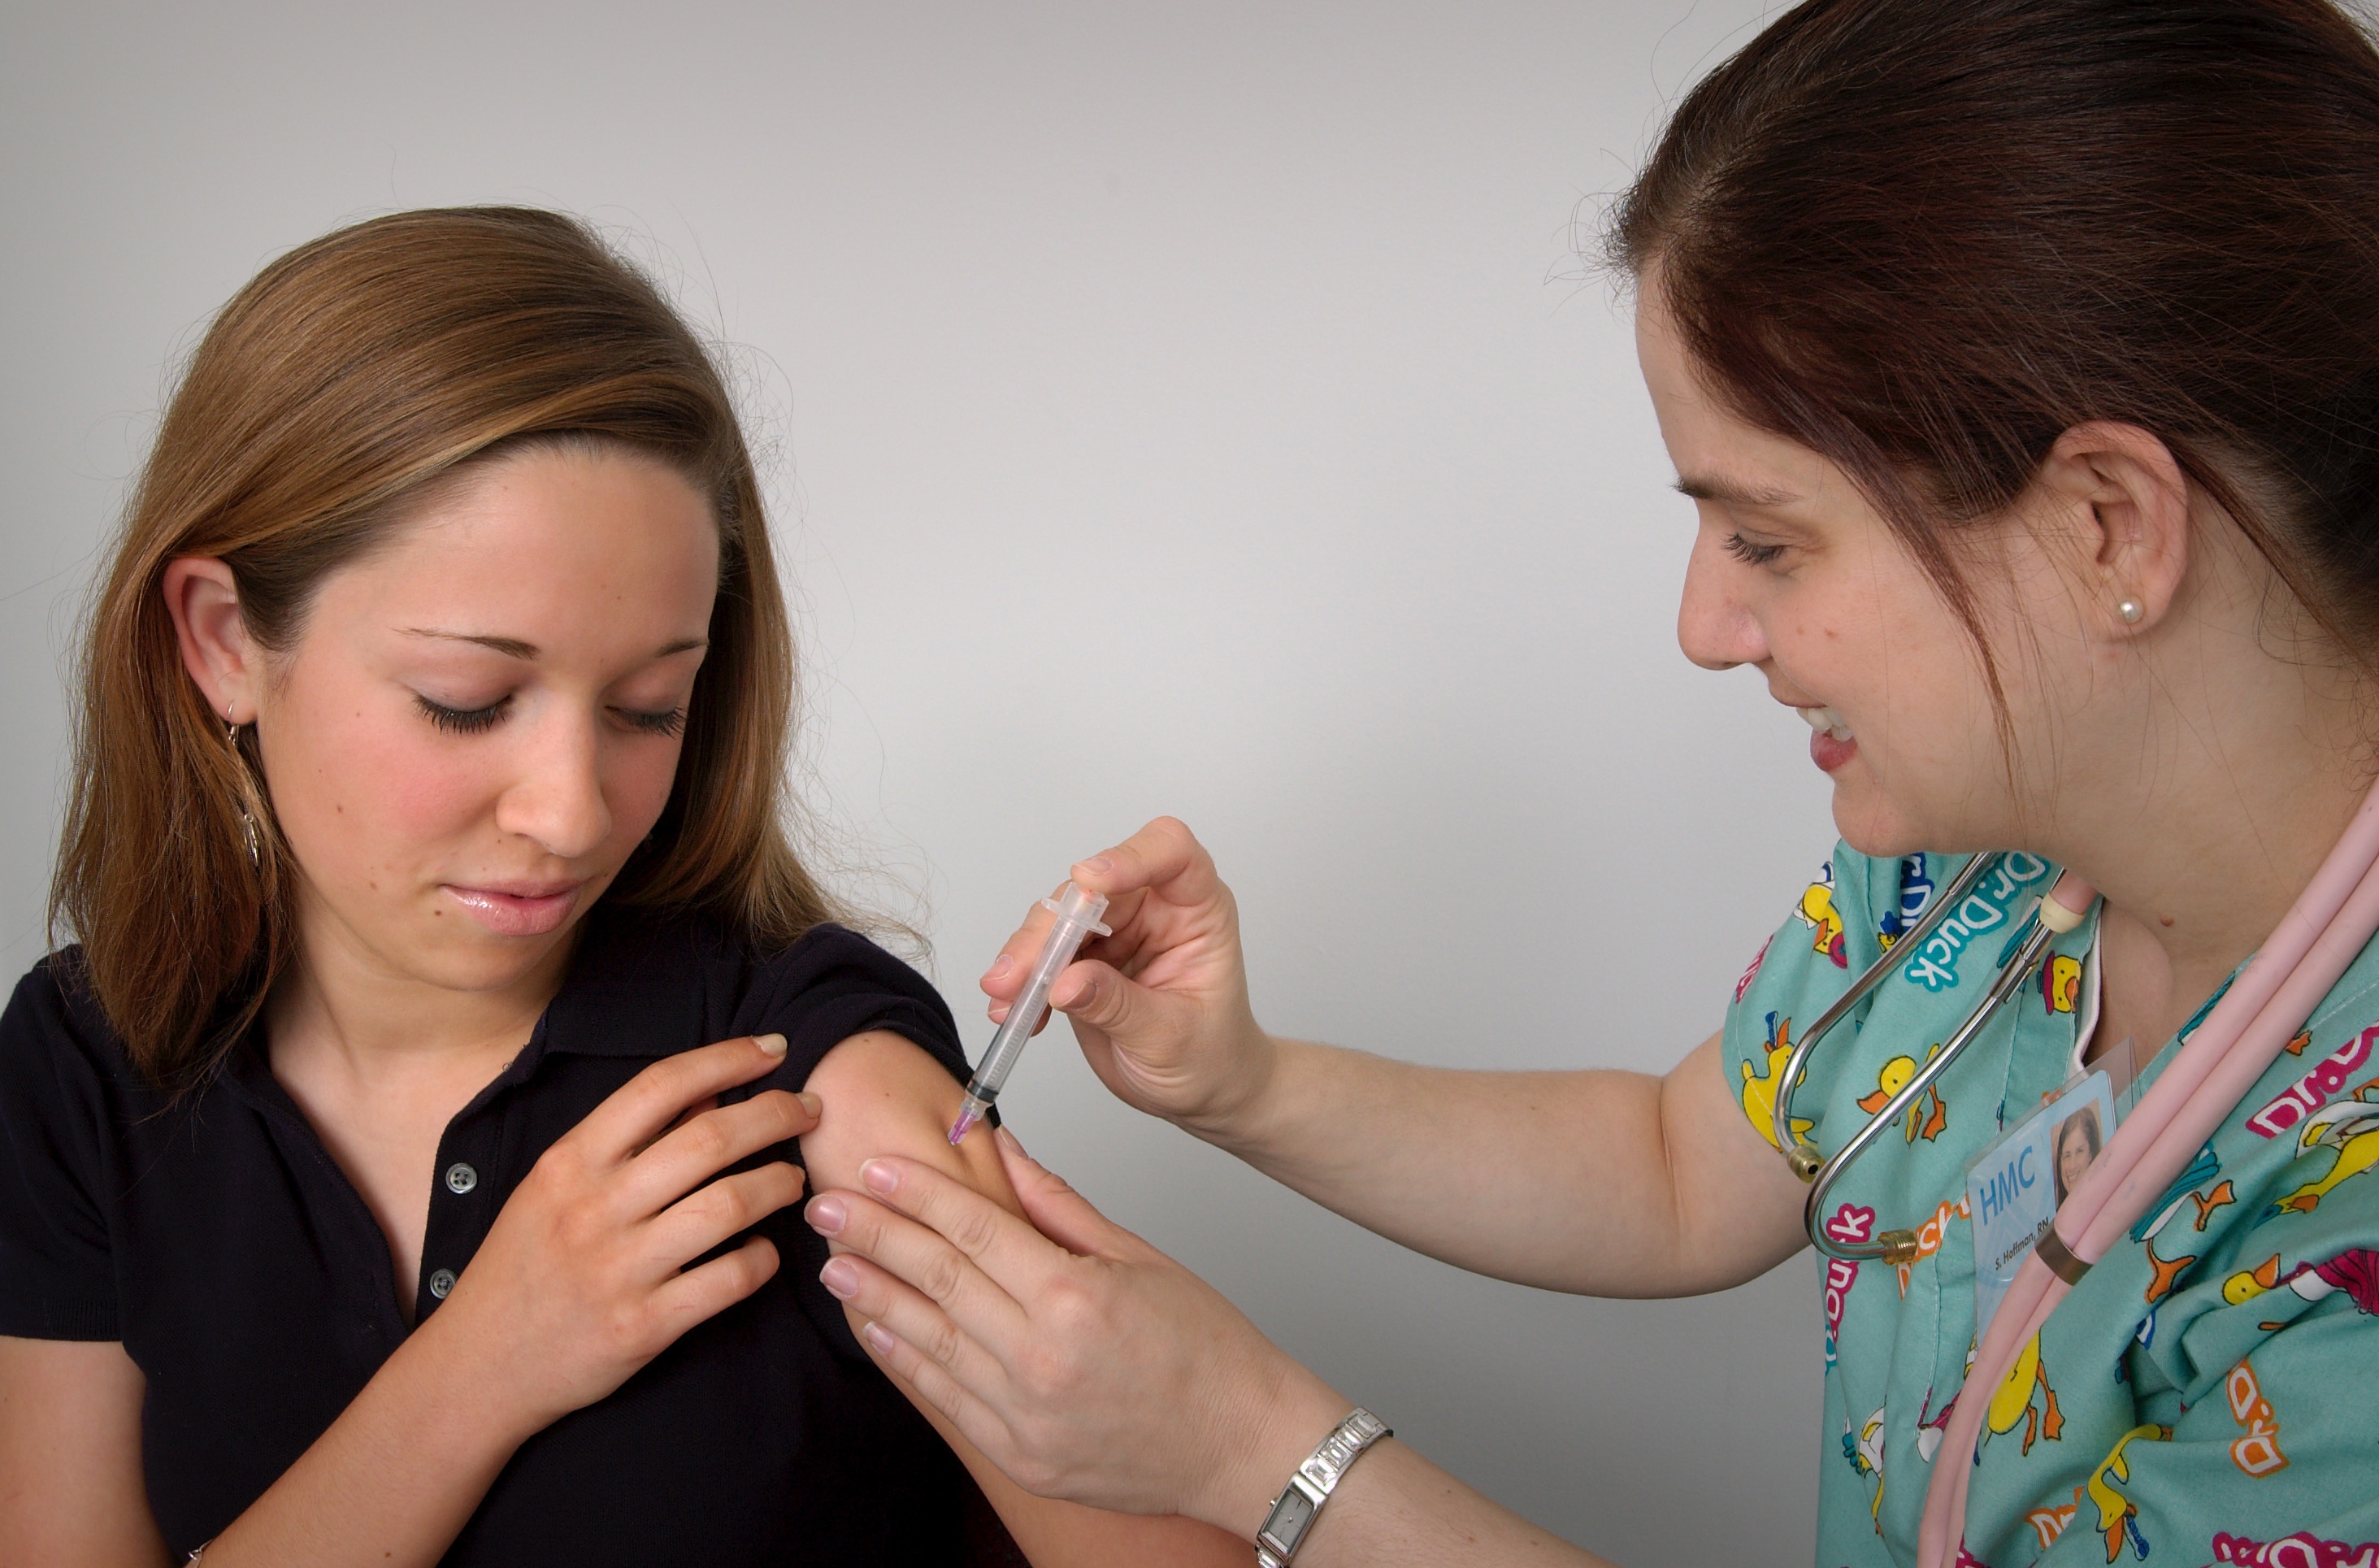 Number of U.S. preteens getting HPV vaccine is on the rise, says UGA research